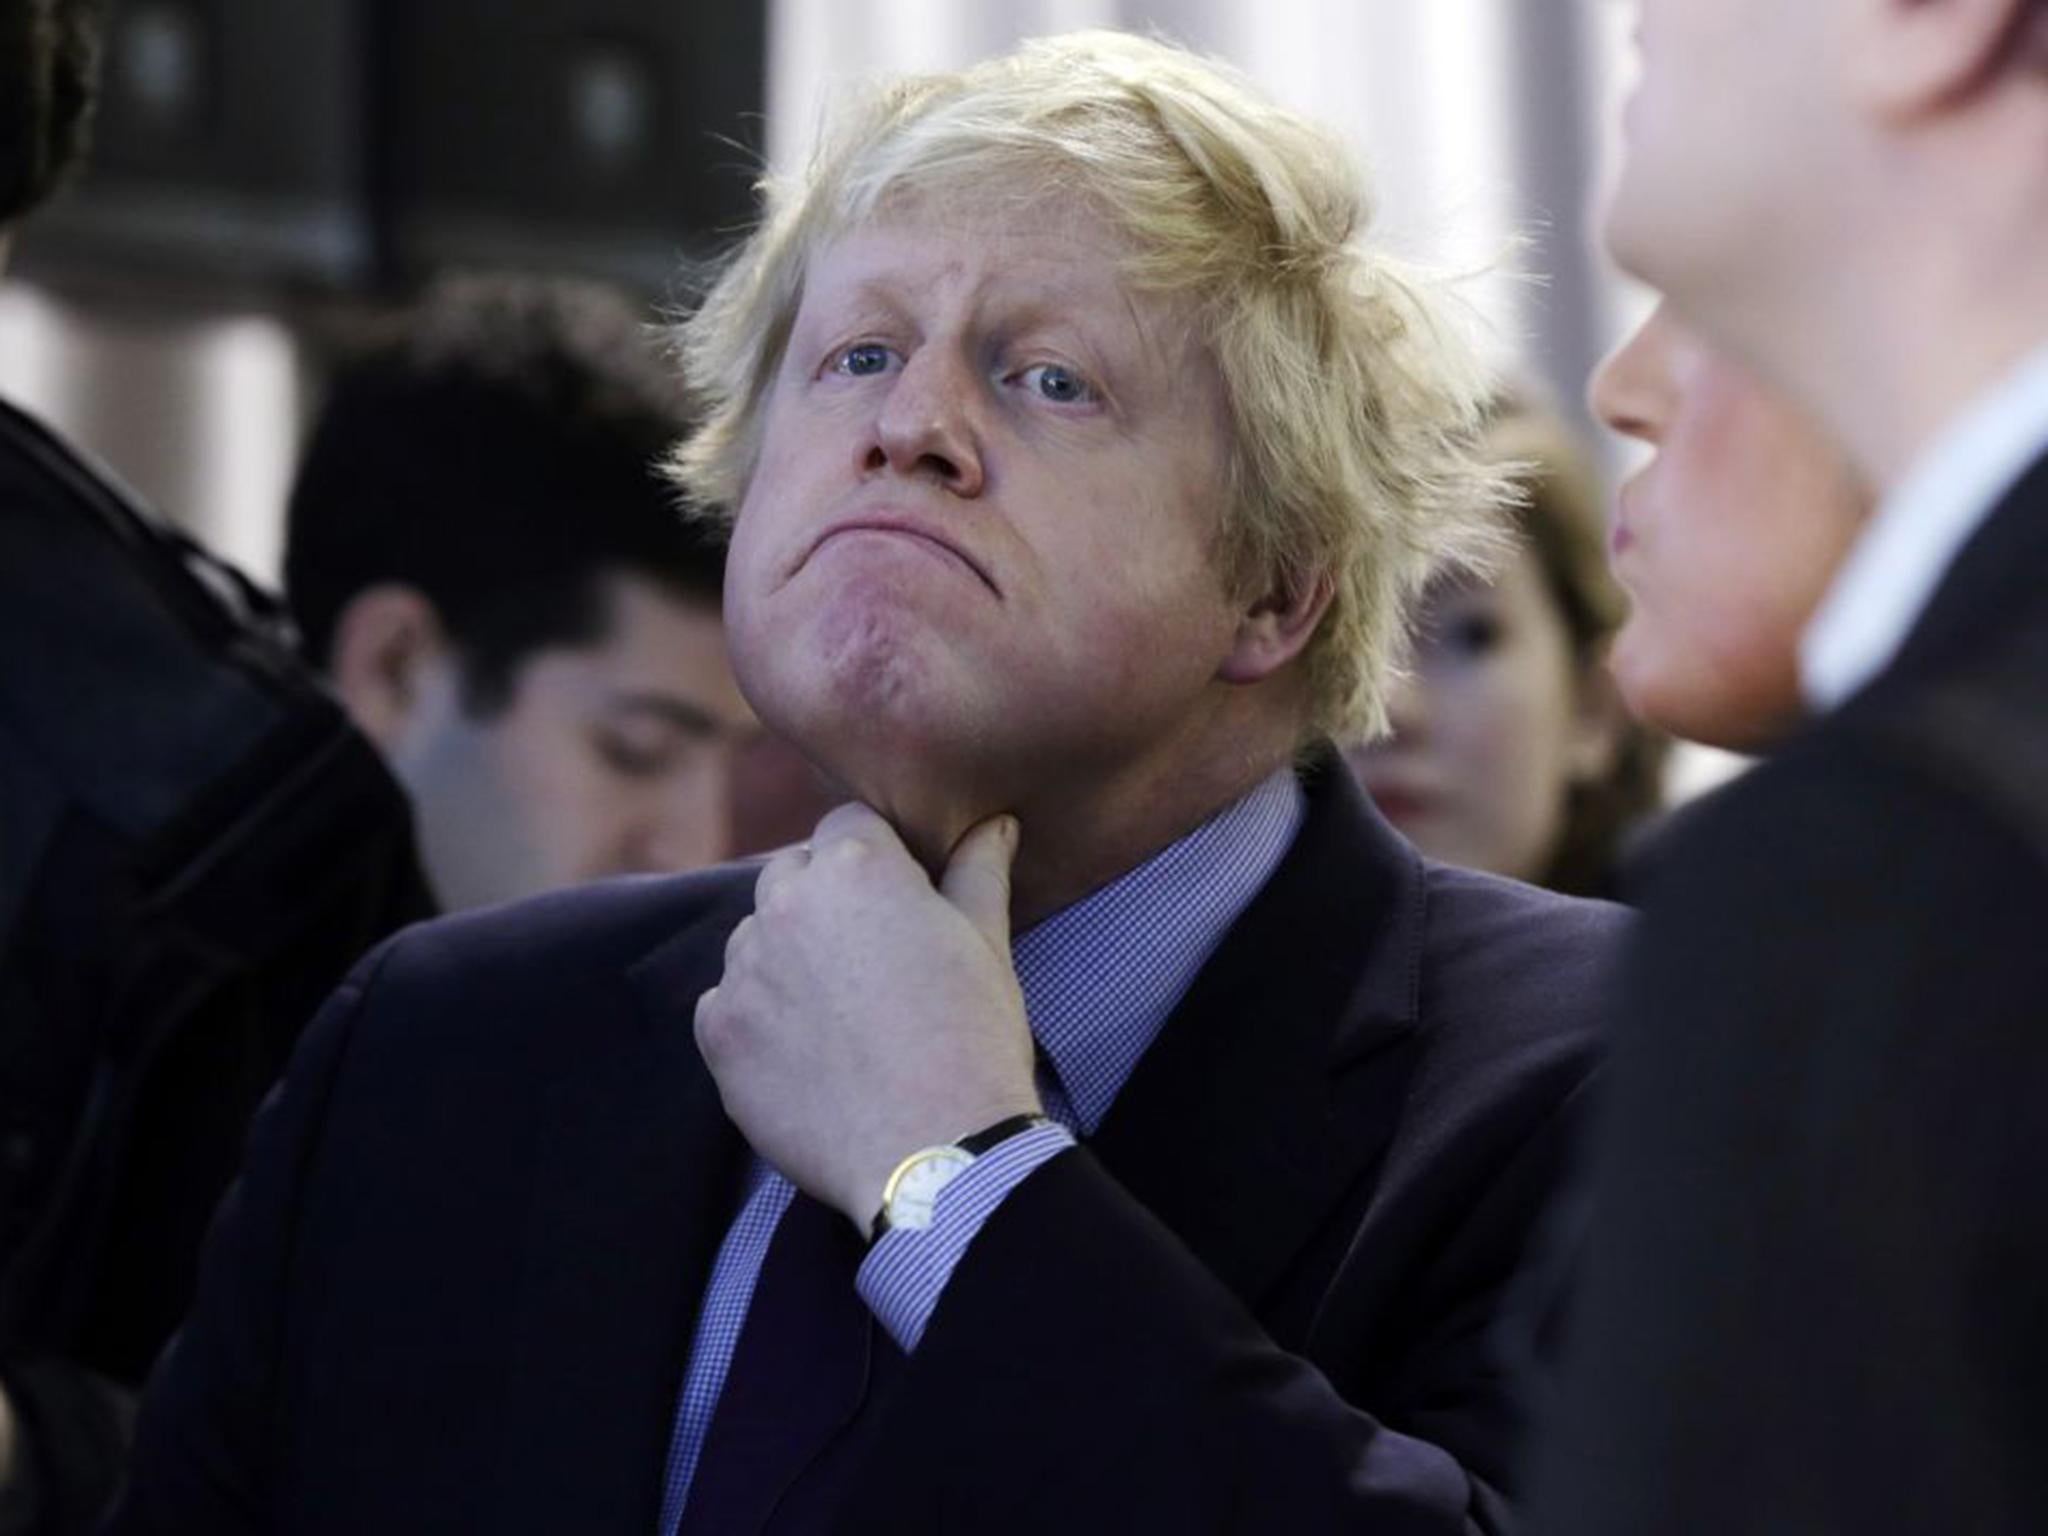 Not even an MP yet, Boris Johnson has been promoted to the top team: he, Osborne and David Cameron will be the faces of the Conservative election campaign